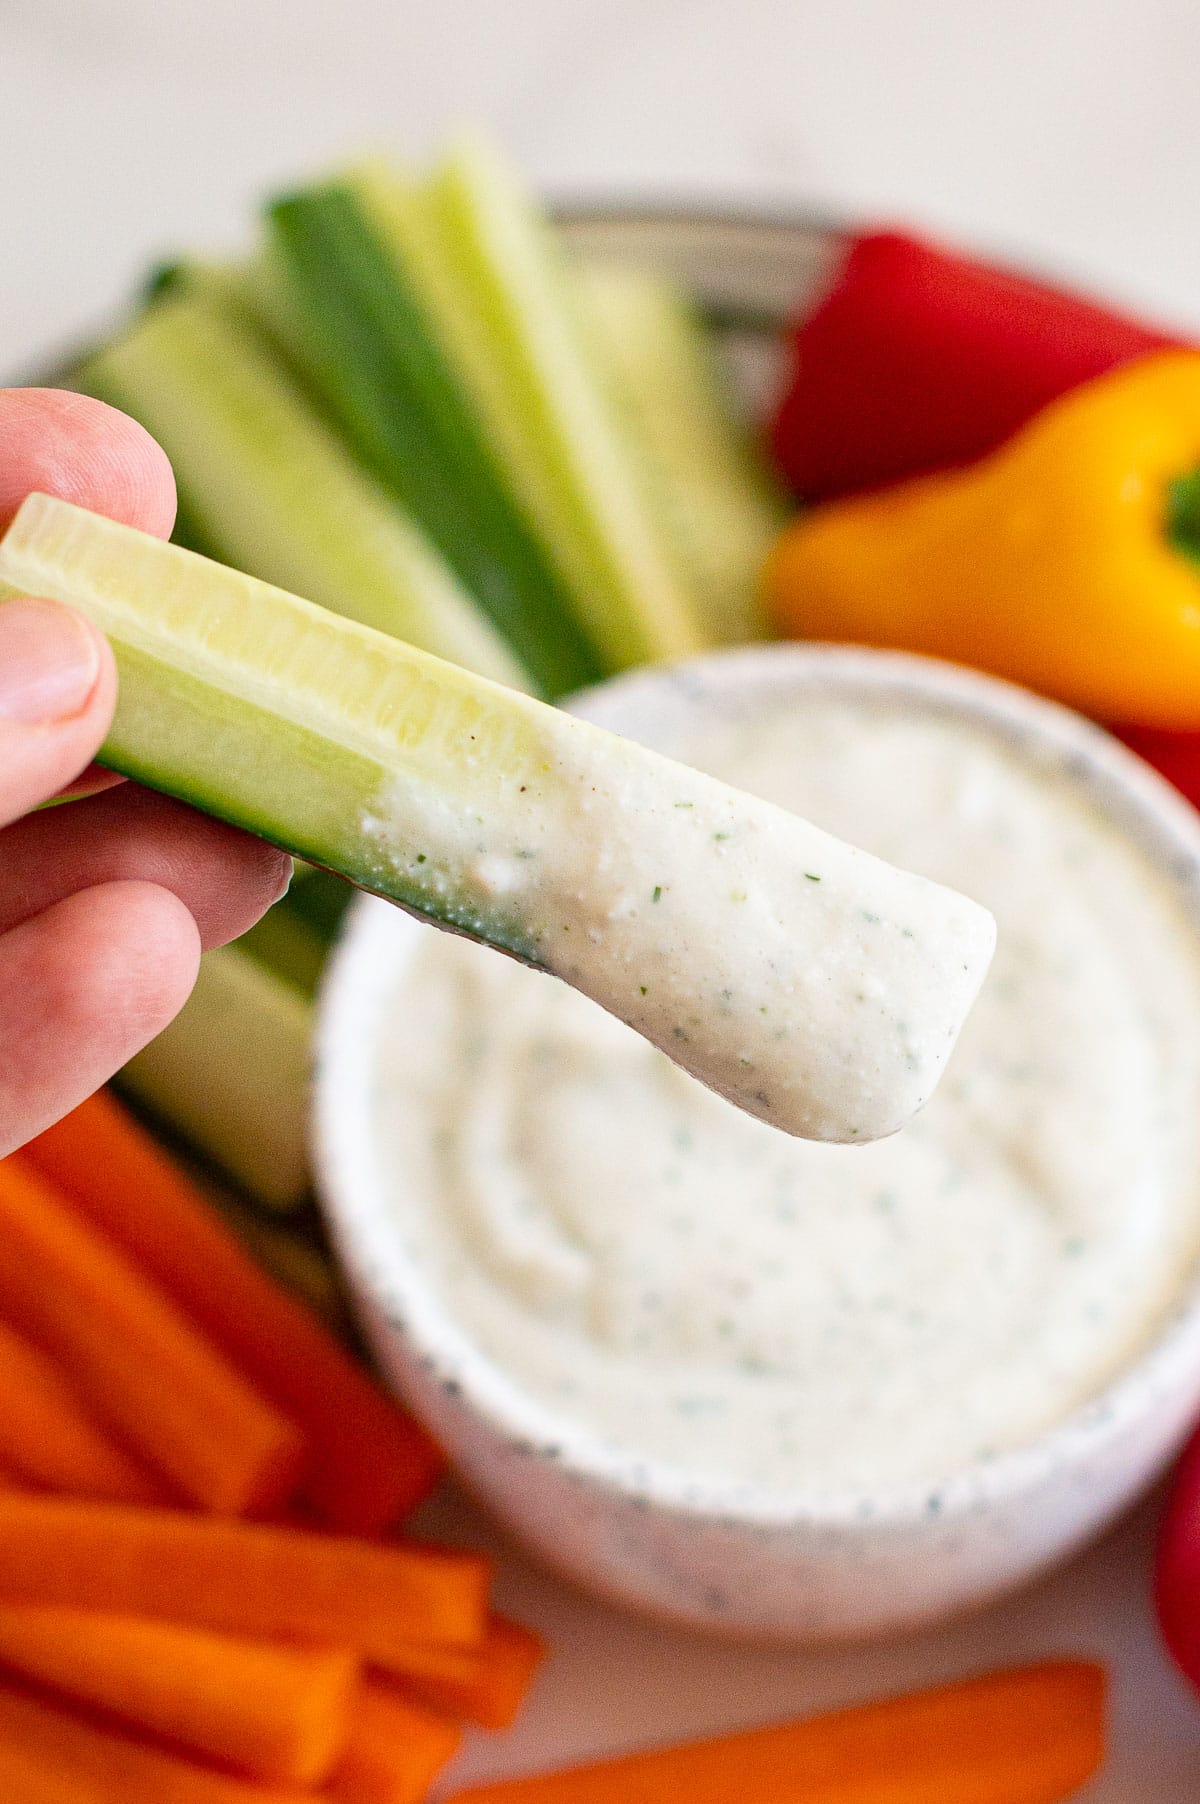 Person holding cucumber stick dipped into ranch dip.